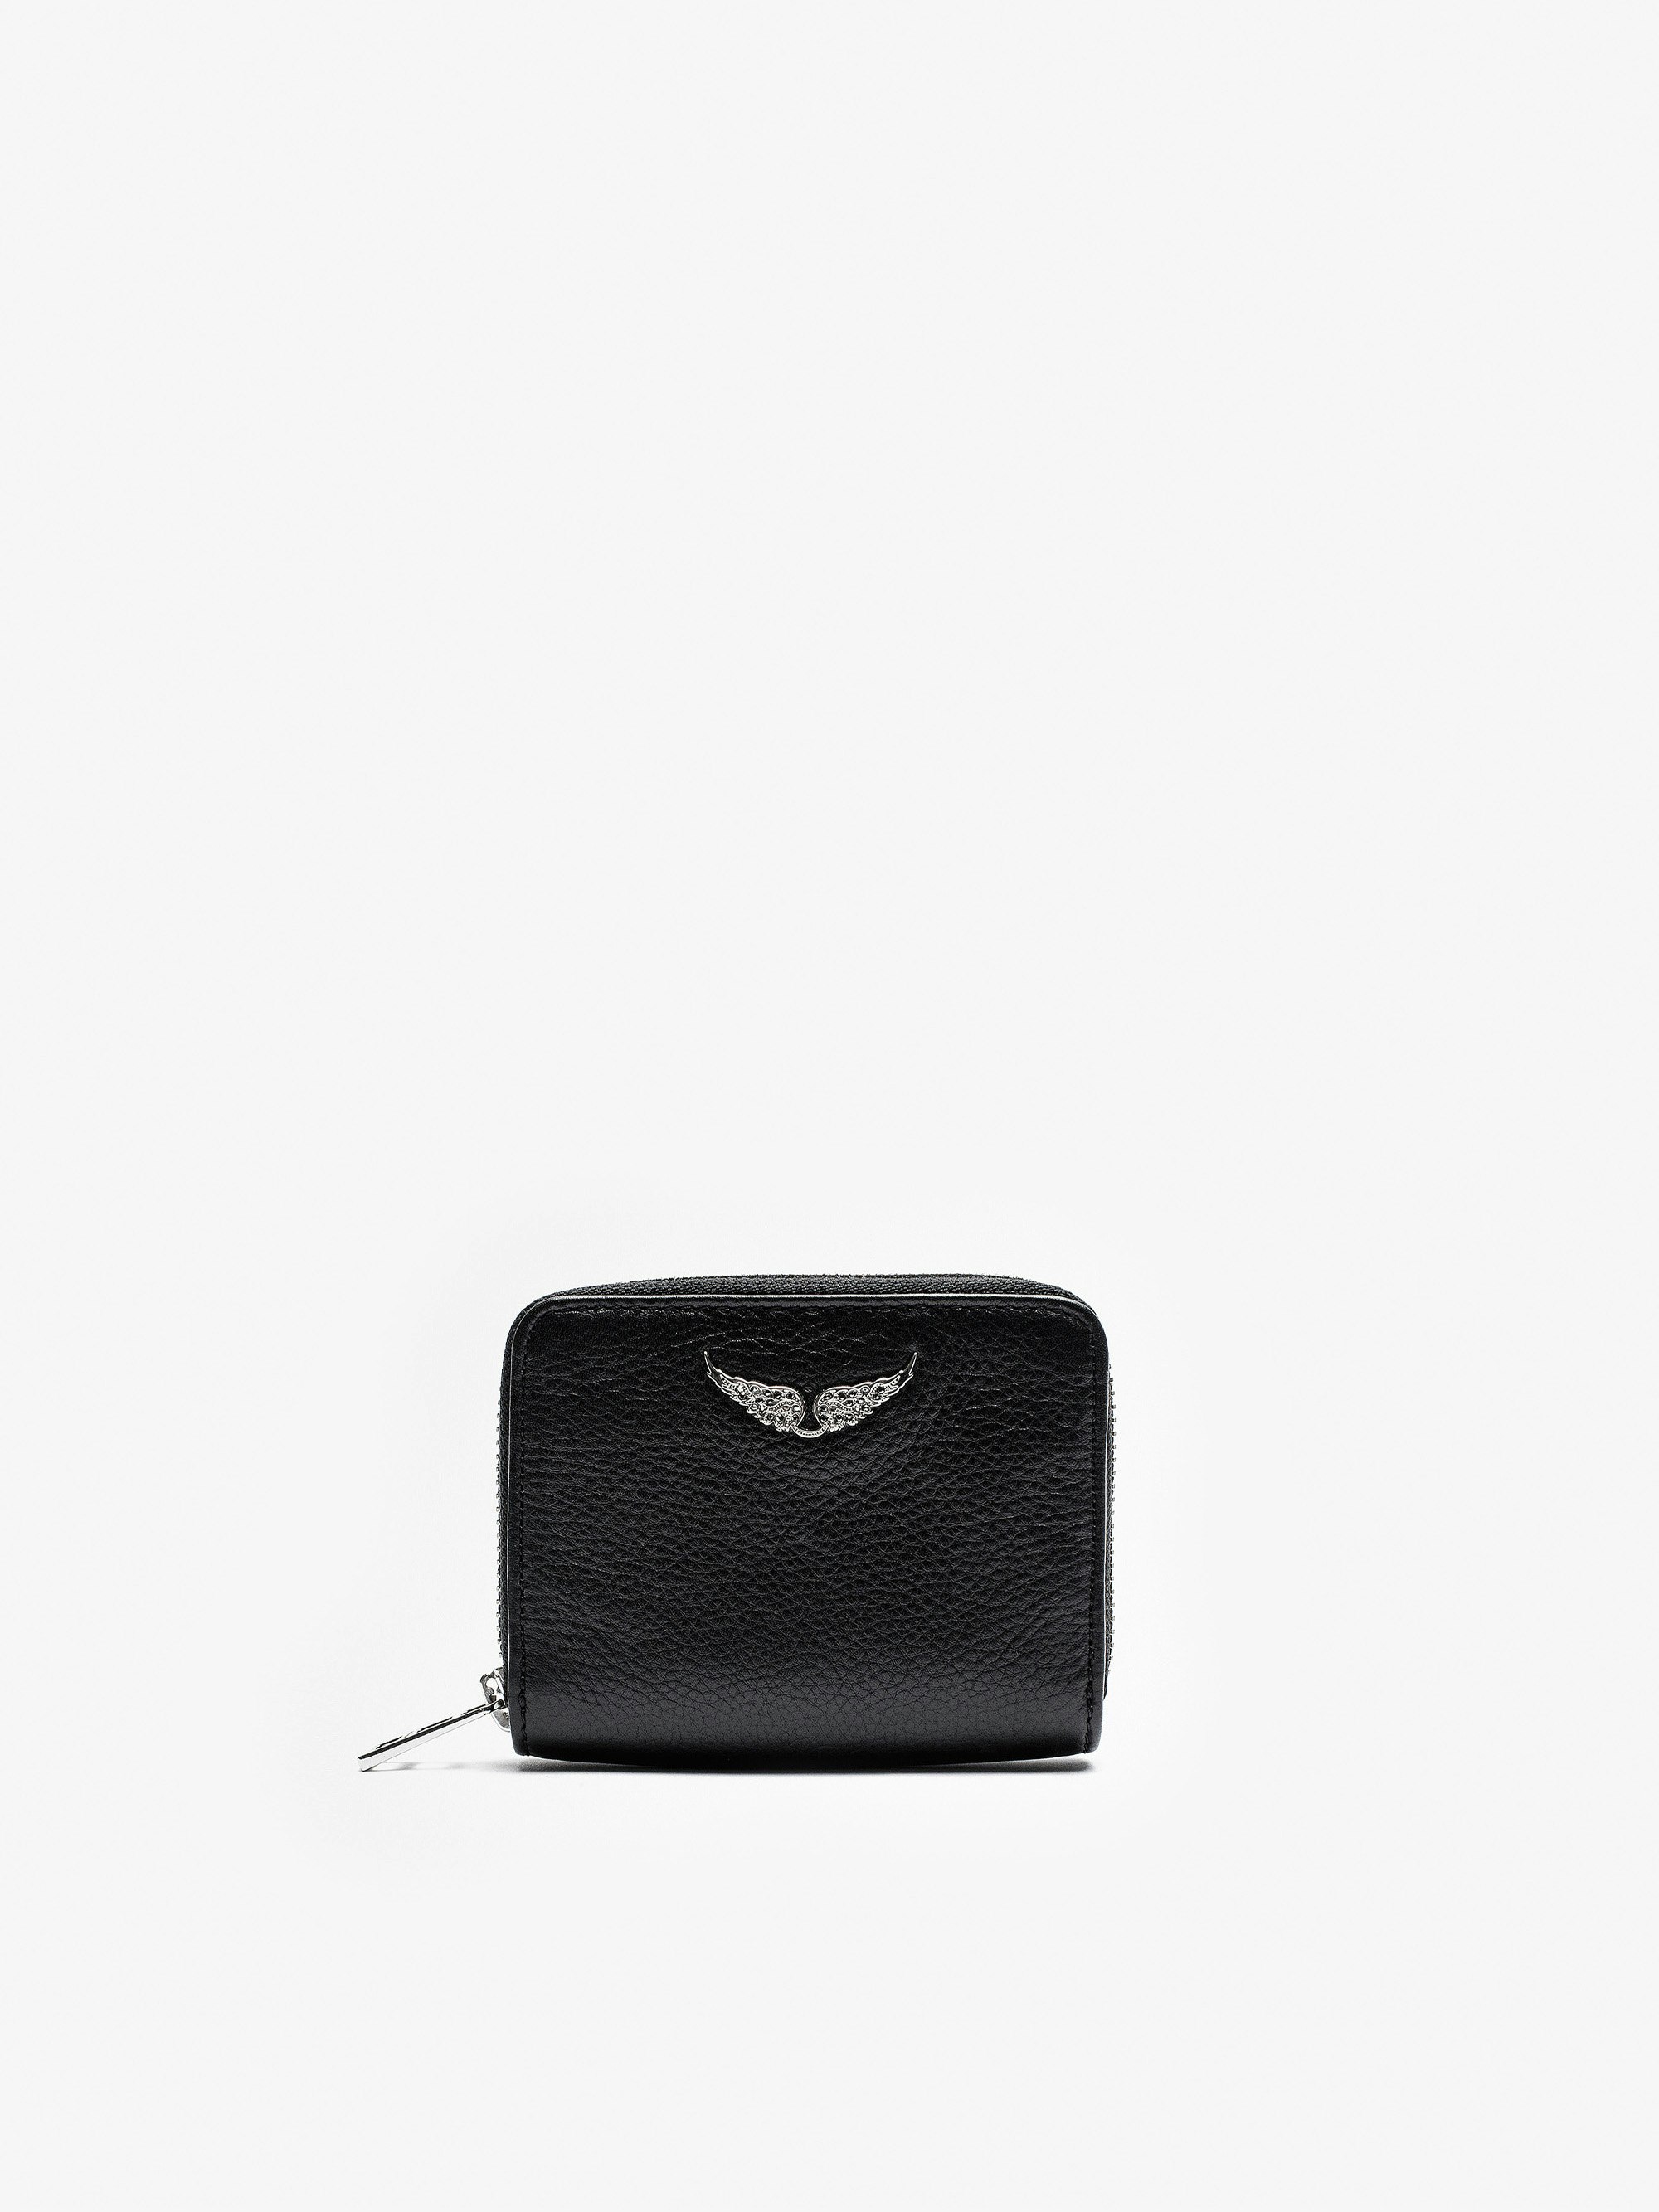 Women's luxury leather wallets & purses | Zadig&Voltaire